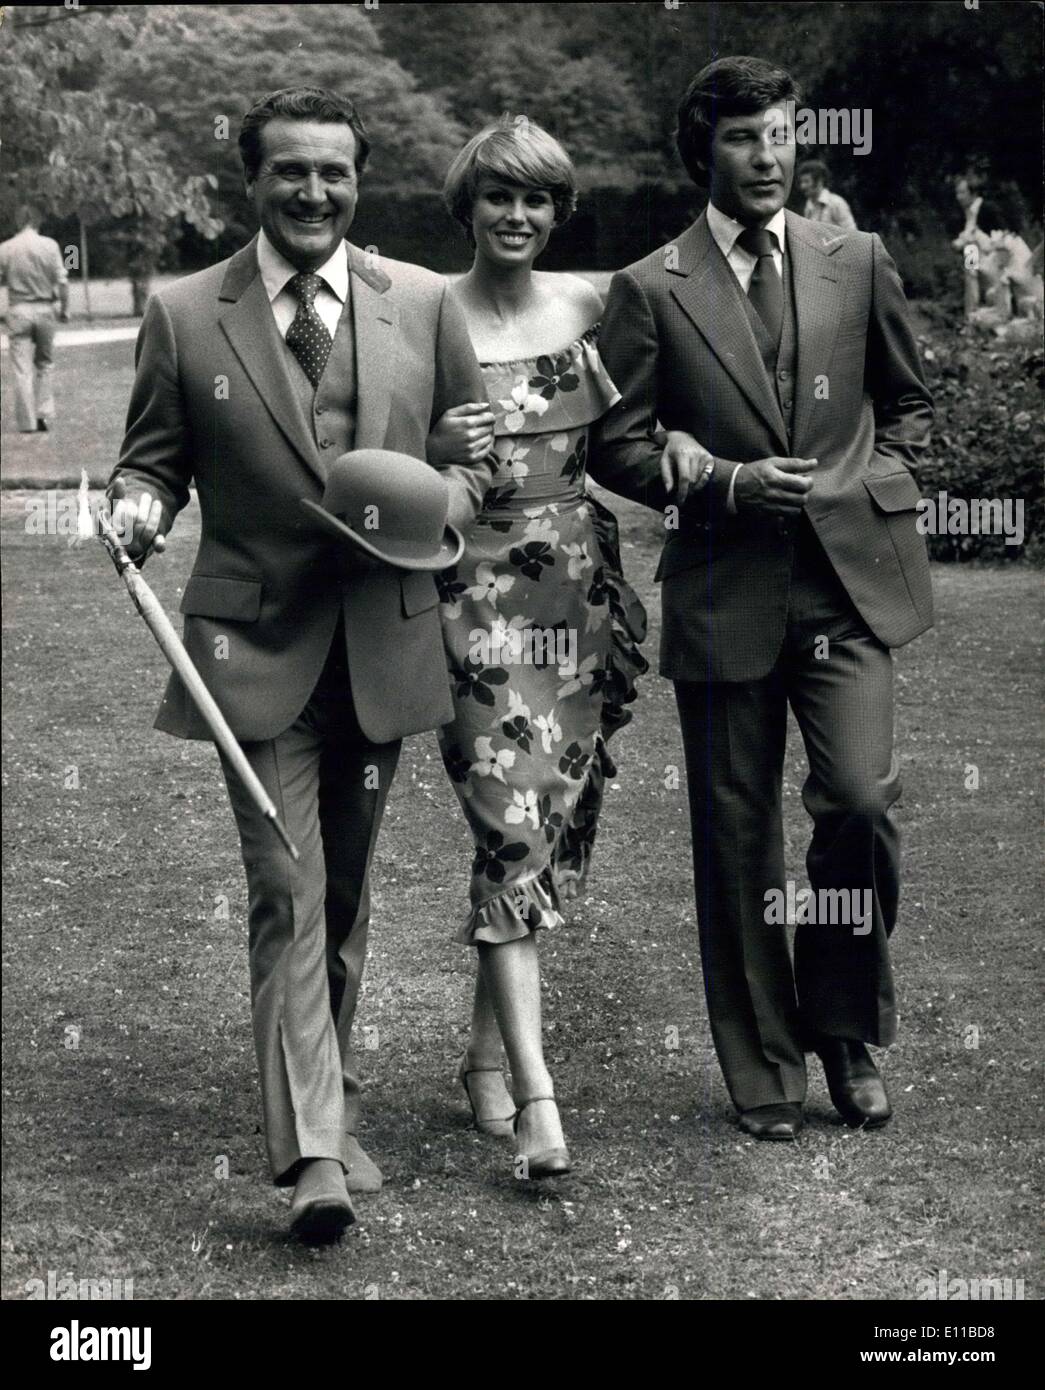 Jul. 12, 1976 - Stars of the New Avengers TV Series get Together at Pinewood Studios.; The principals of the new TV series '' The Avengers'' were pictured together for the first time at Pinewood Studios today. they are Patrick Macnee as John Steed, Joanna Lumley, as Purdey, and Gareth hunt, as Mike Gambit.The old series of the Avengers grossed more than ?17-millin and about one third of this amount coming to Britain. Photo shows the three Avengers (left to right) Patrick Macnee, Joanna Lumley and Gareth Hunt stride out during todays photo call at Pinewood Studios Stock Photo